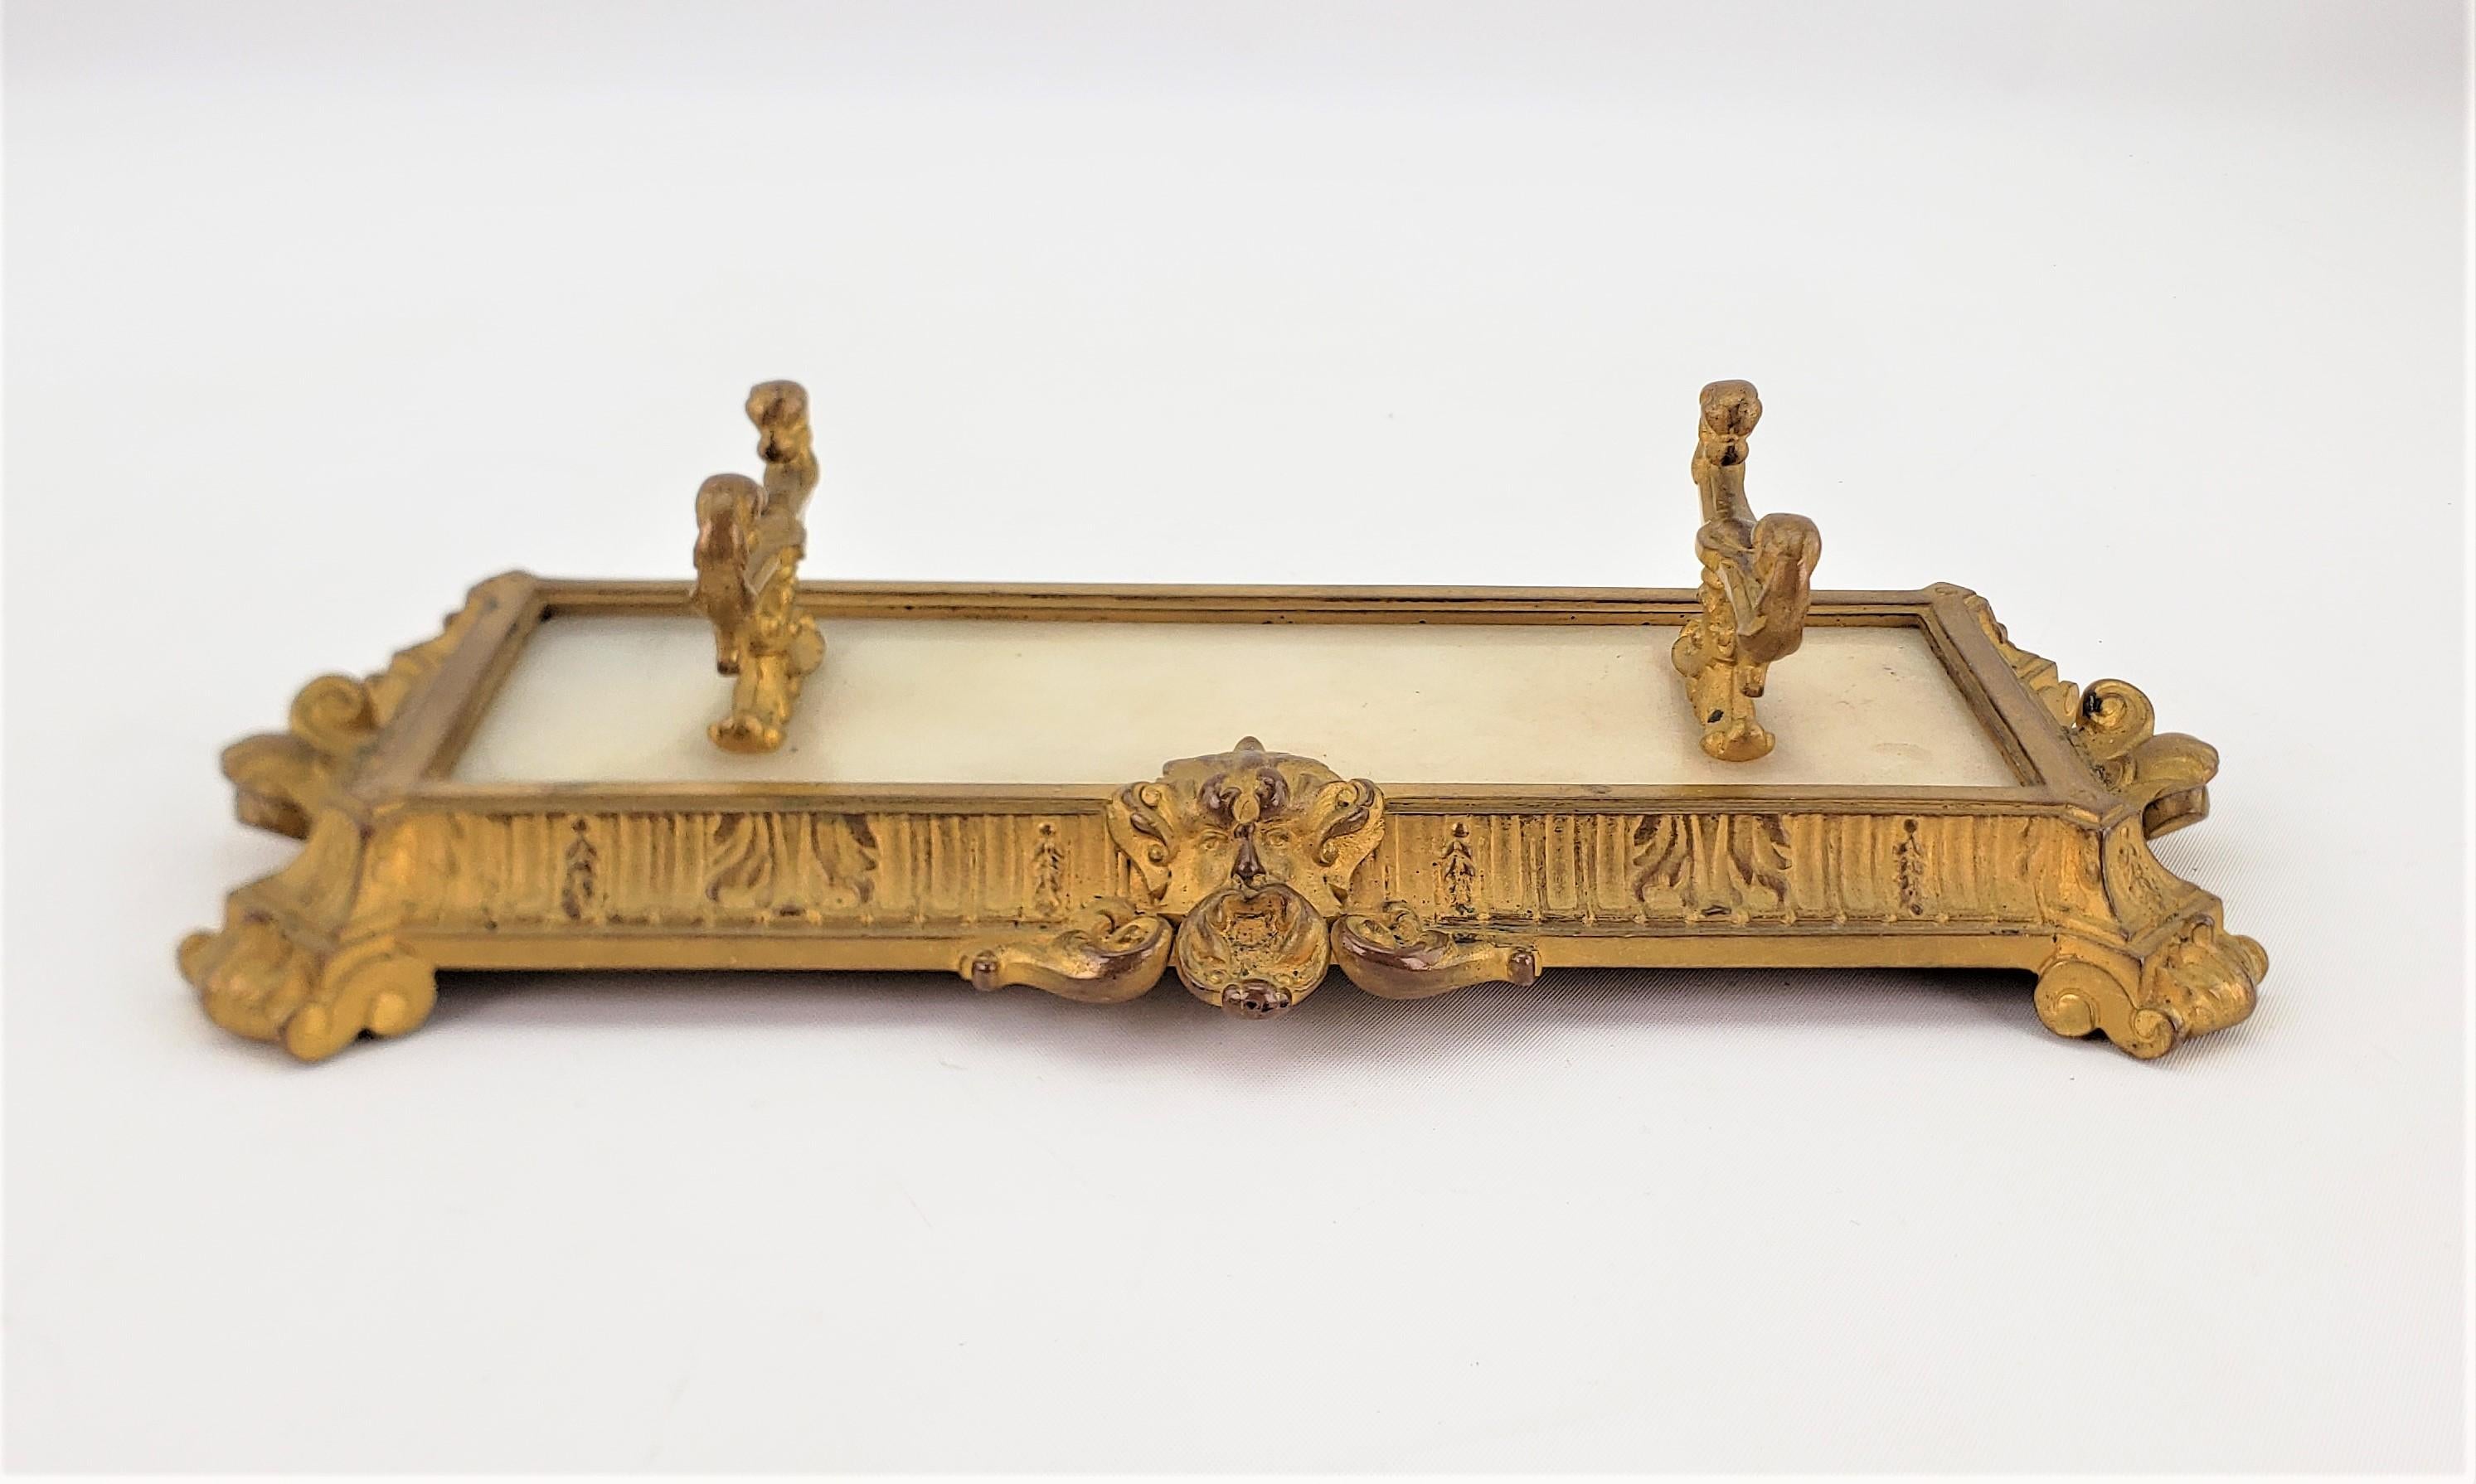 This antique pen rest or holder is unsigned, but presumed to have been made in the United States in approximately 1900 in the period Edwardian style. The frame and pillars of the pen rest are made of cast bronze with a gilt patination and has